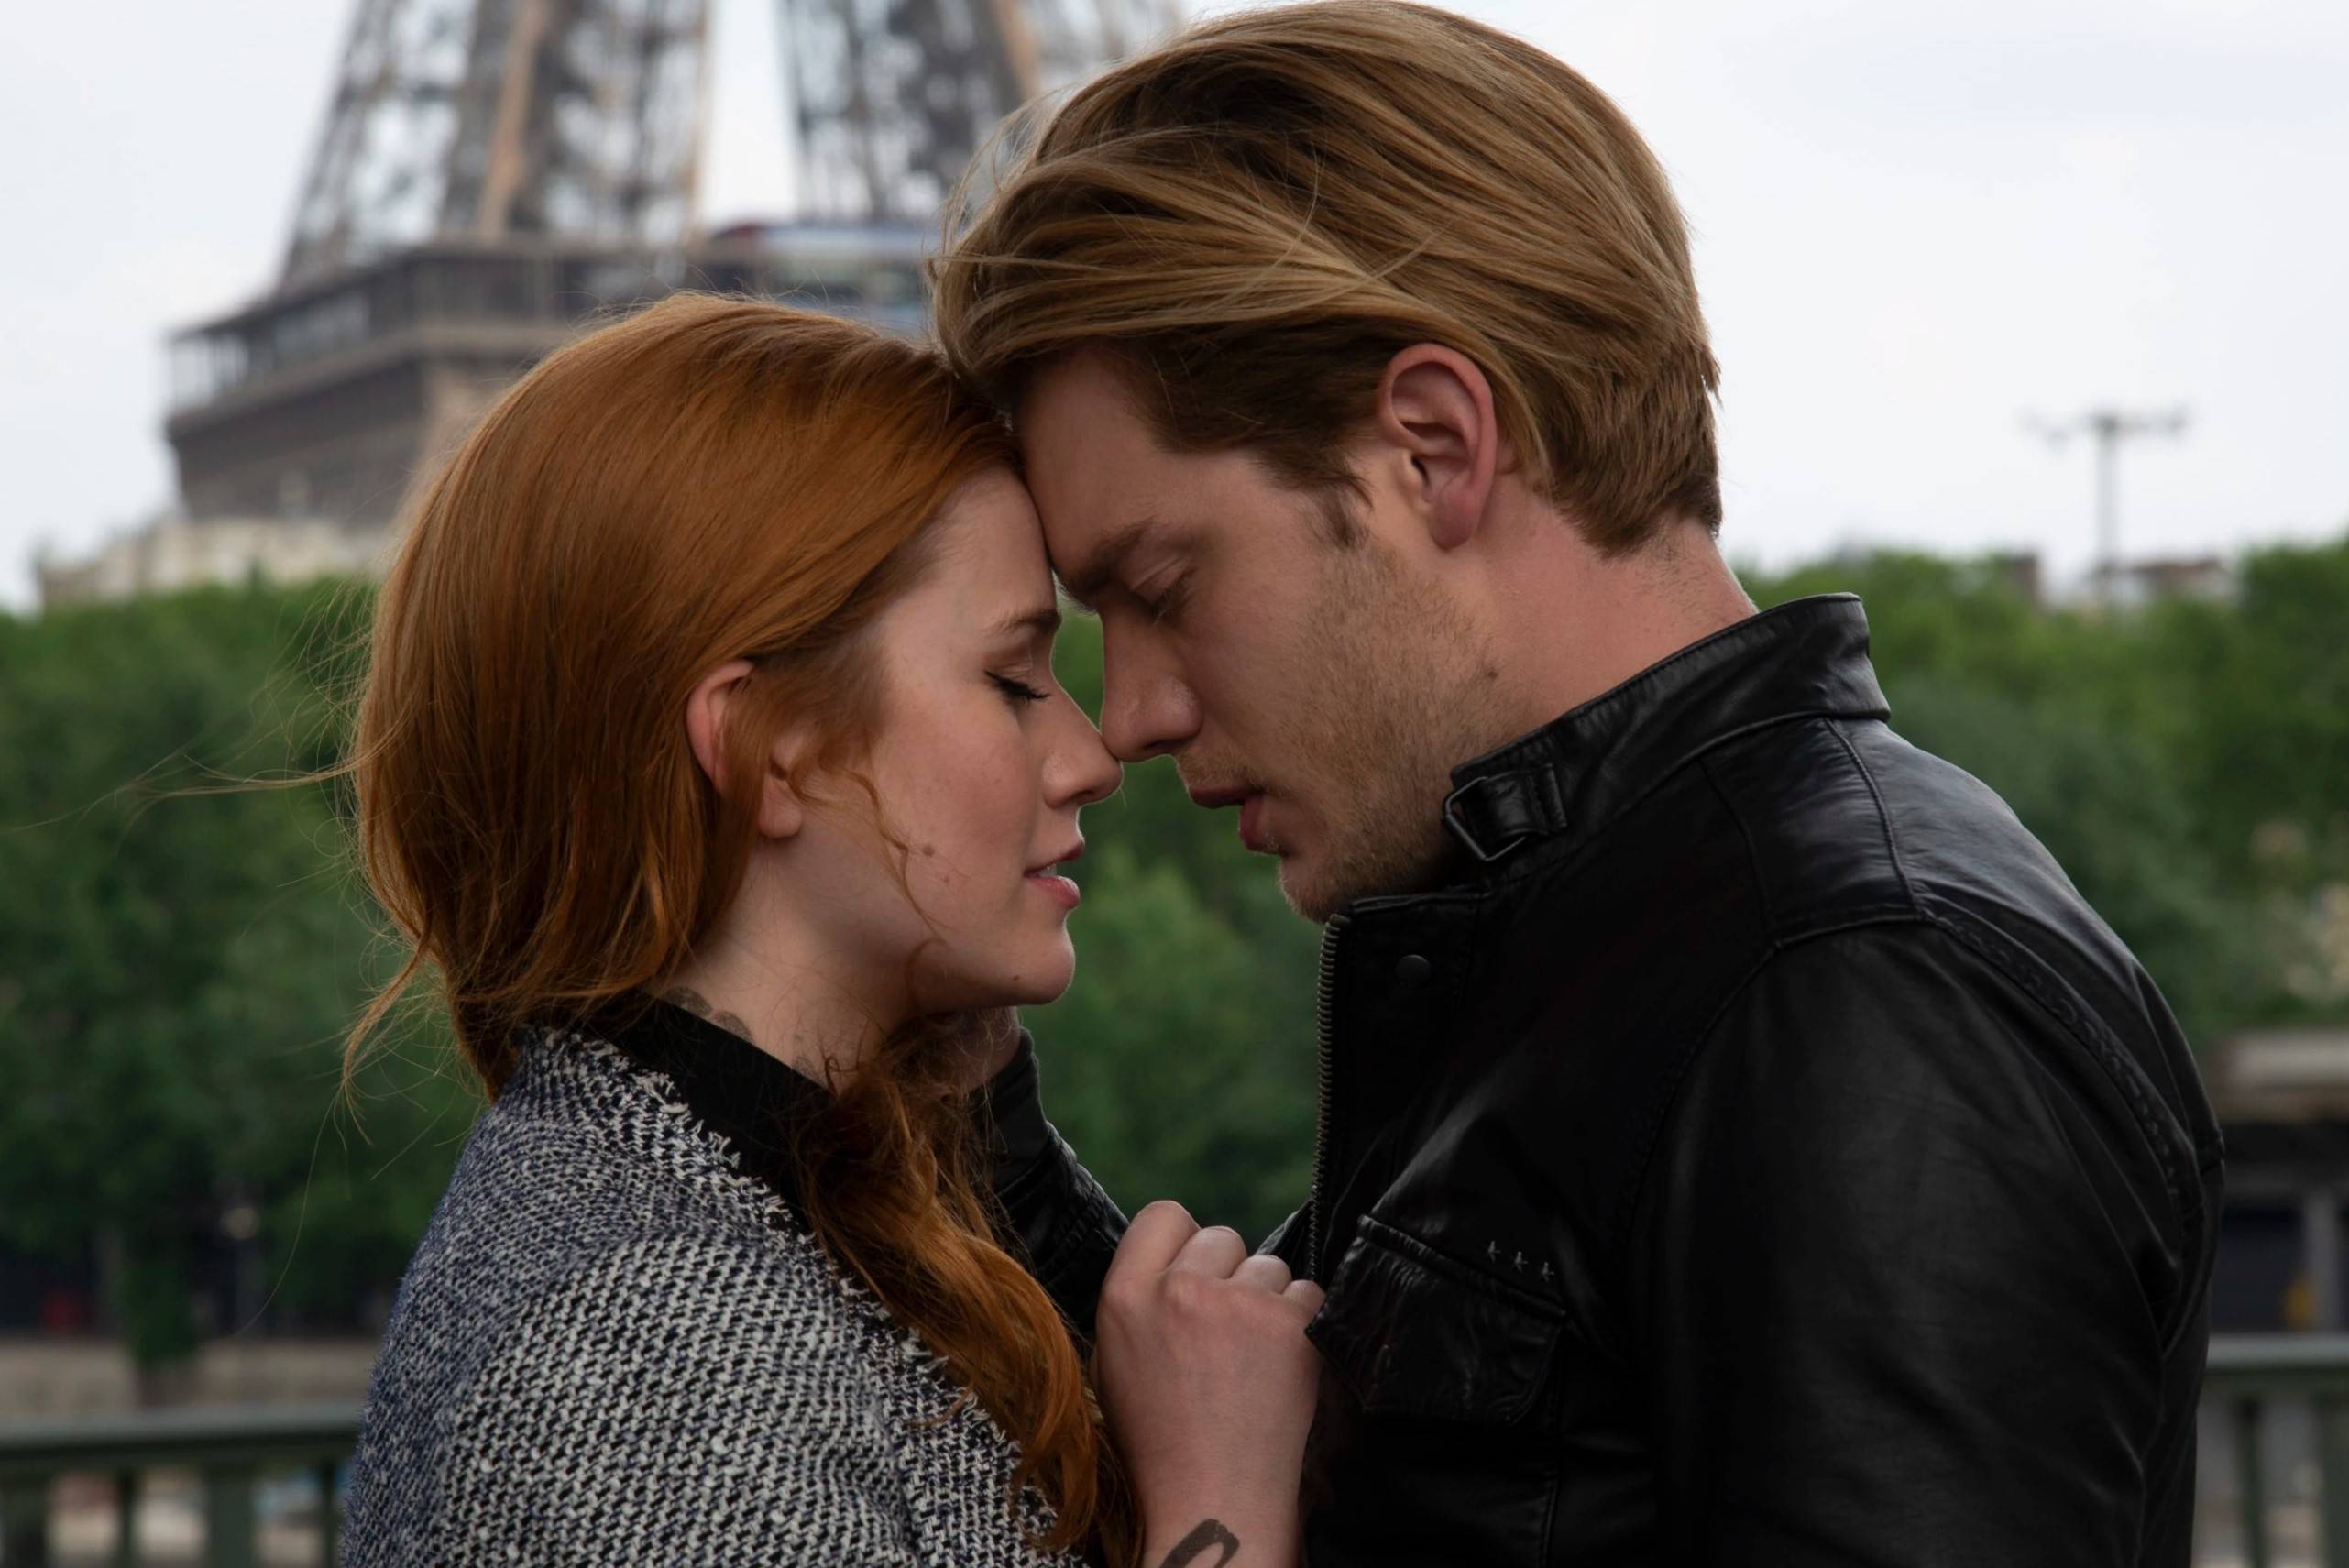 The Shocking Truth About Jace And Clary's Relationship In The Mortal Instruments Series!